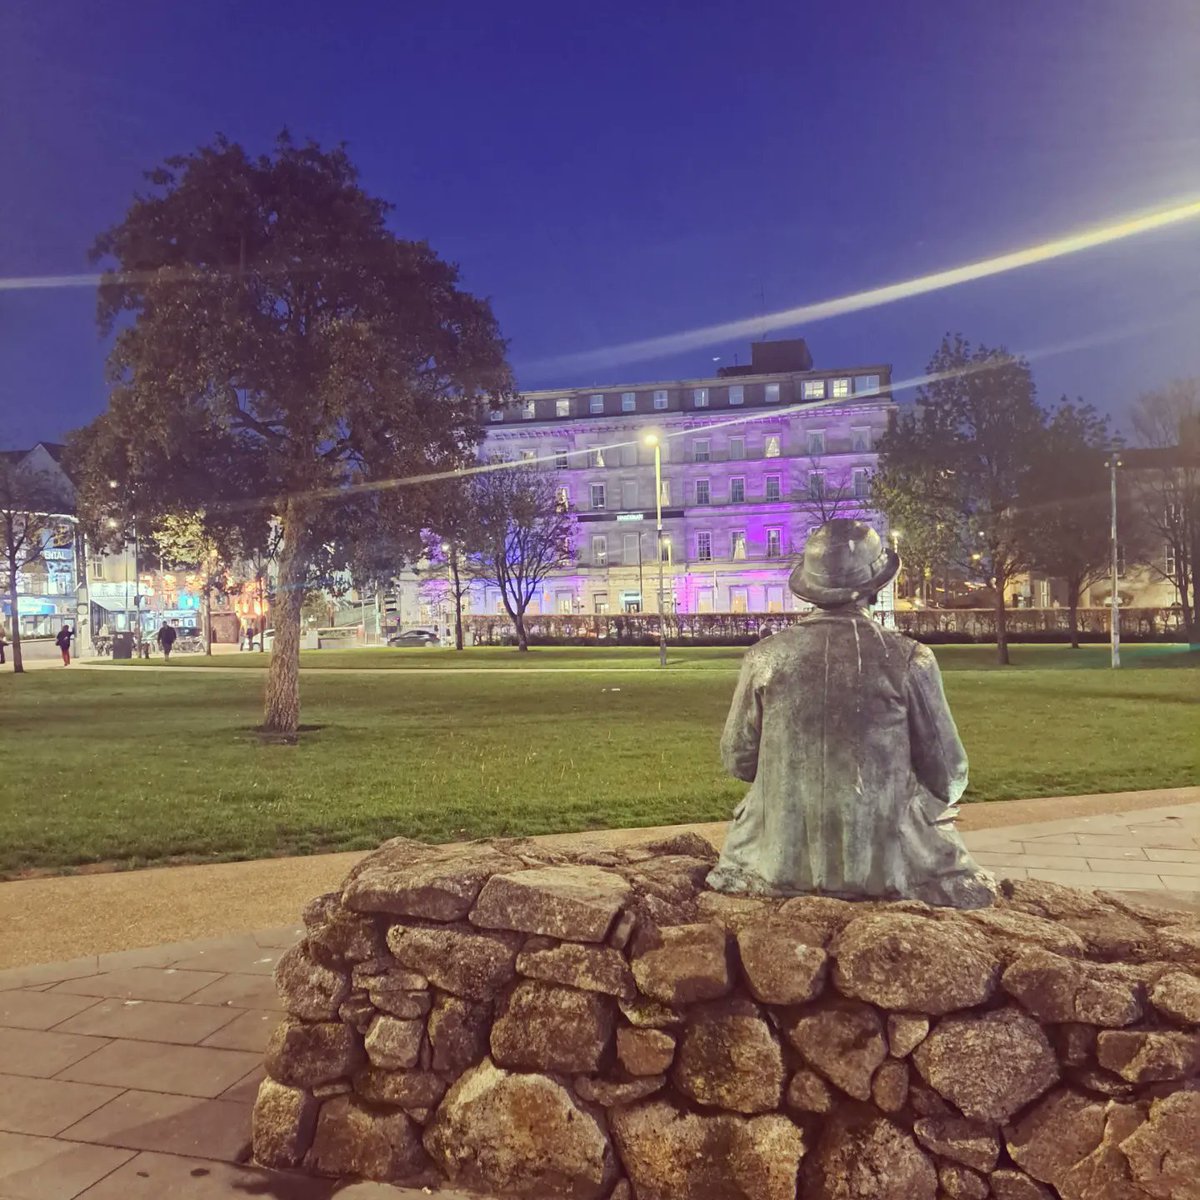 Galway nights #Galway #eyresquare #citylife @ThisIsGalway @visit_galway